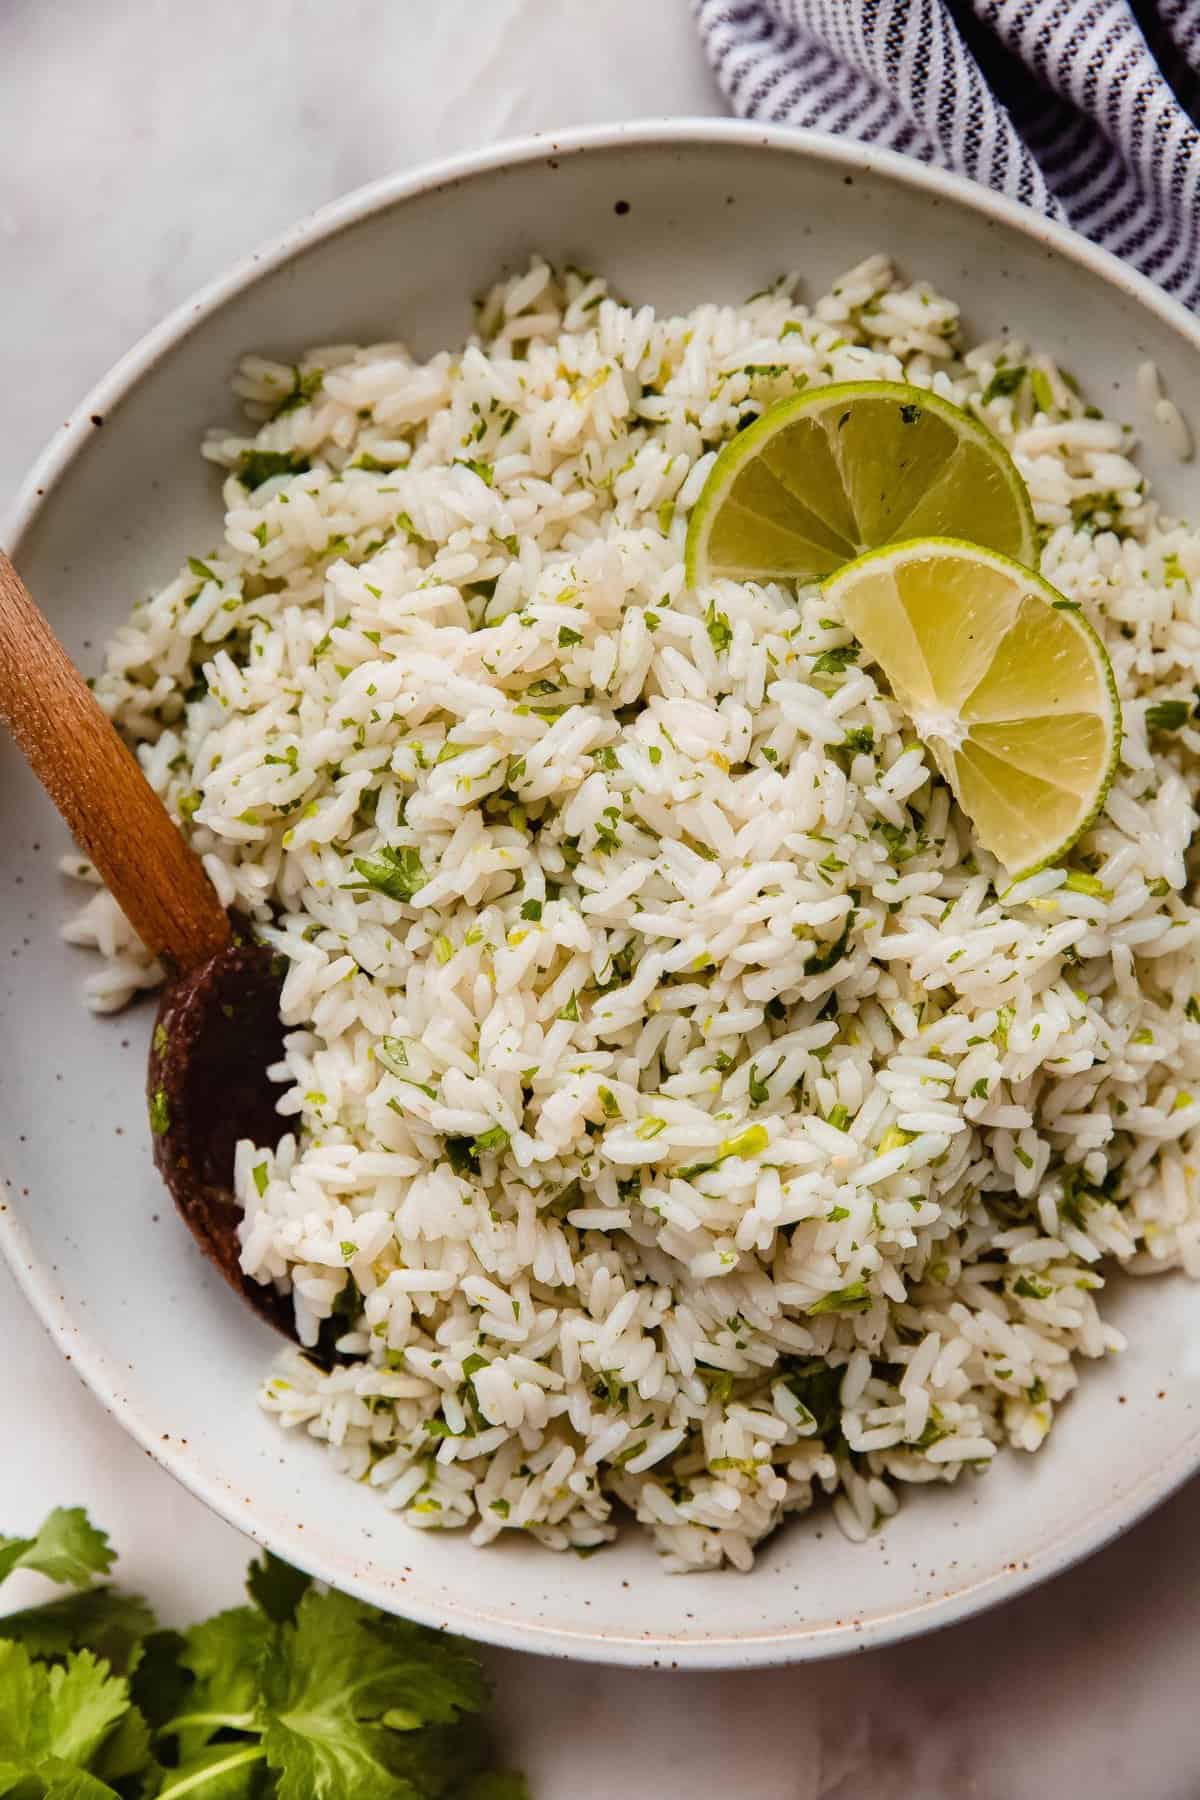 Better than chipotle's cilantro lime rice garnished with lime slices in a bowl. 